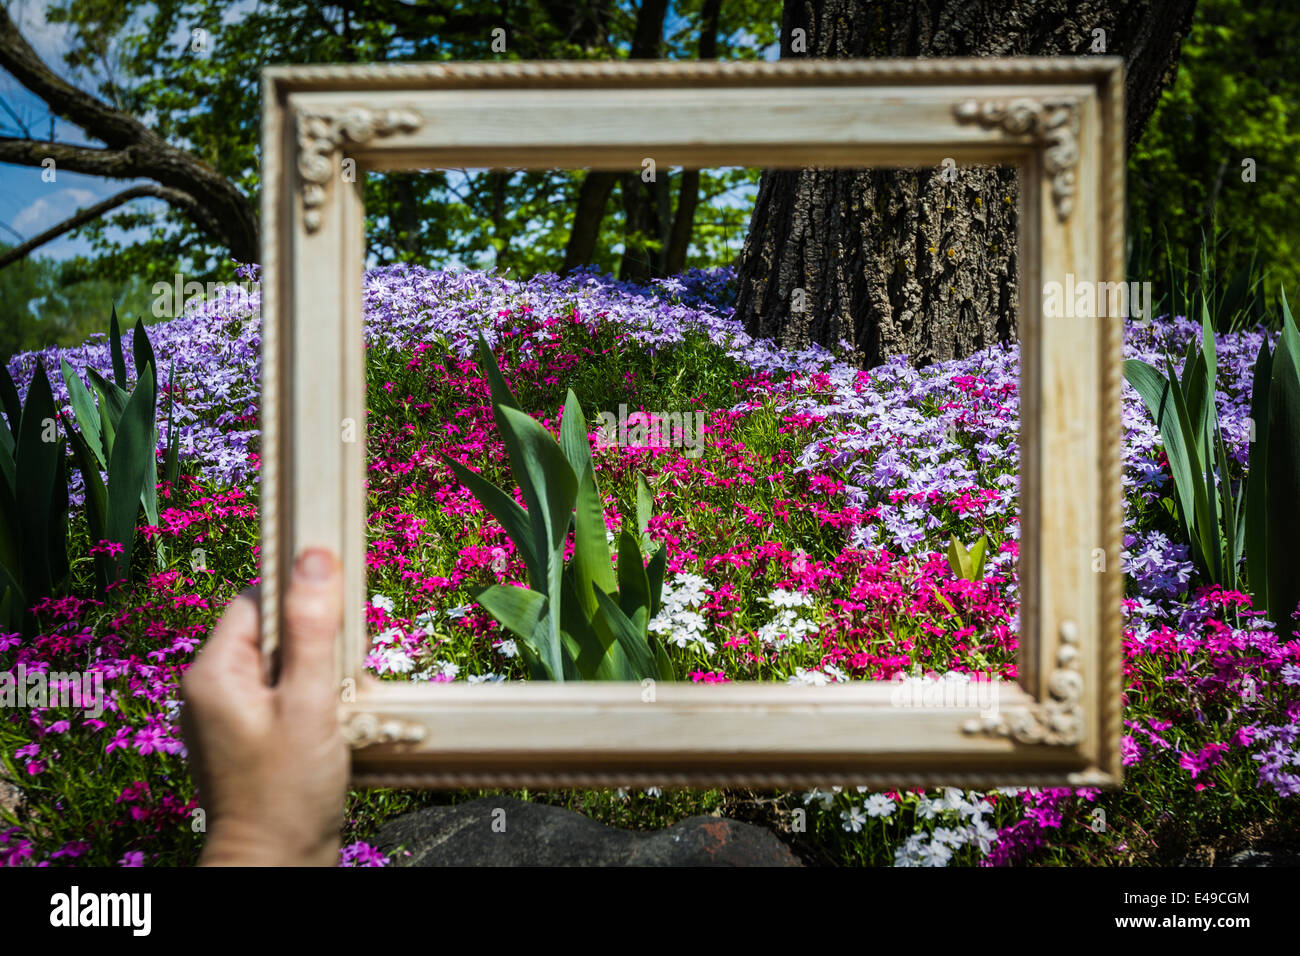 phlox garden with vivid colors and a hand holding a picture frame in front of it Stock Photo